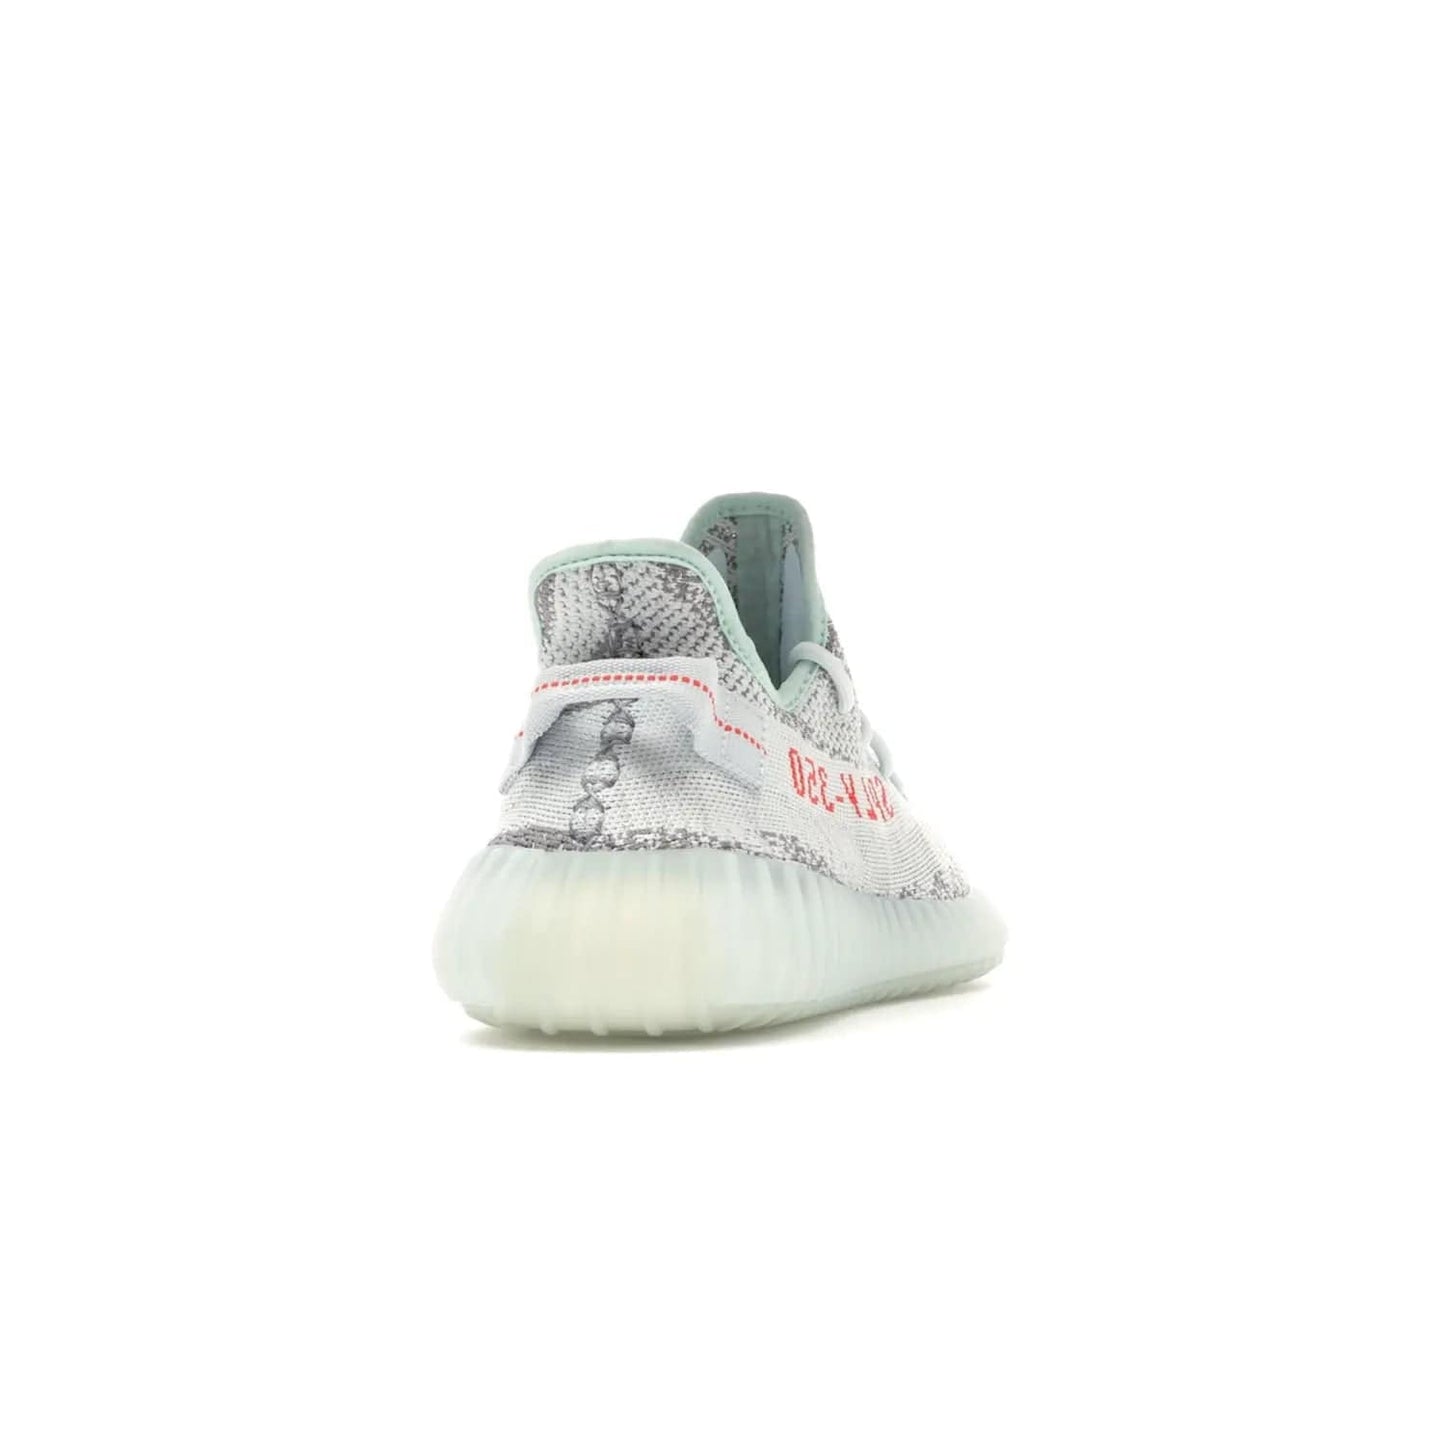 adidas Yeezy Boost 350 V2 Blue Tint - Image 30 - Only at www.BallersClubKickz.com - The adidas Yeezy Boost 350 V2 Blue Tint merges fashion and functionality with its Primeknit upper and Boost sole. Released in December 2017, this luxurious sneaker is perfect for making a stylish statement.